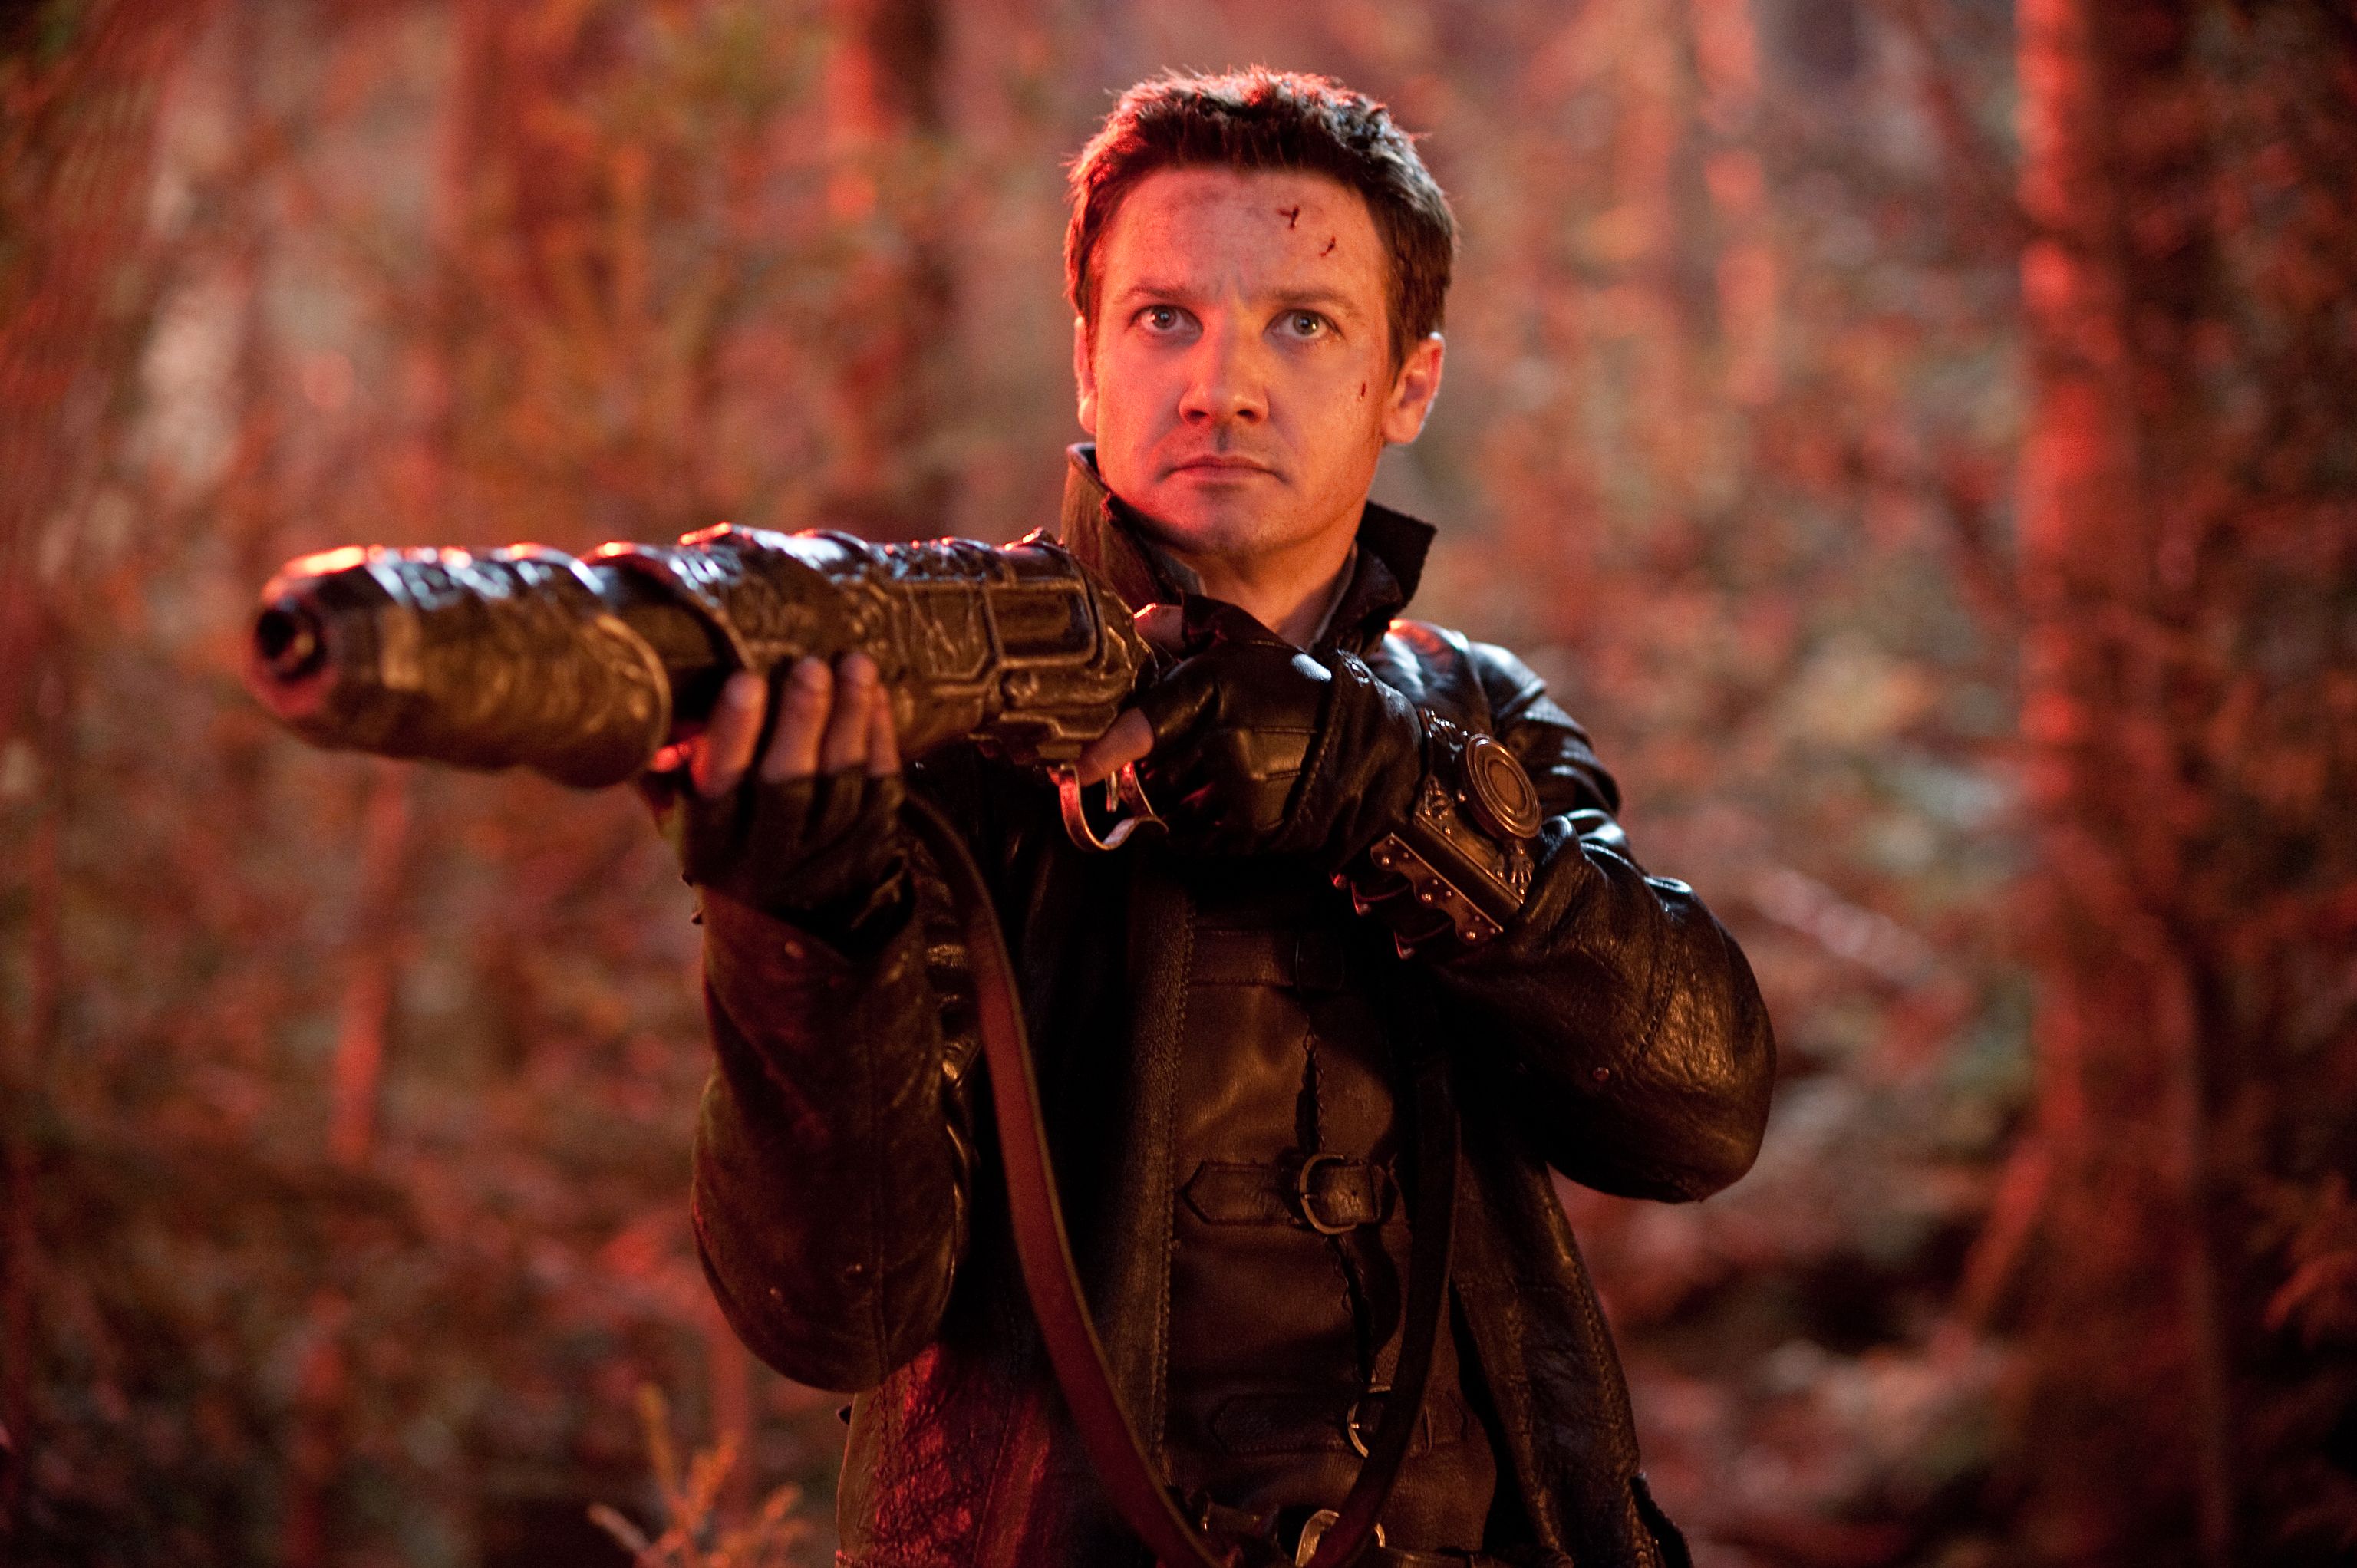 Hansel and Gretel: Witch Hunters Photo 4